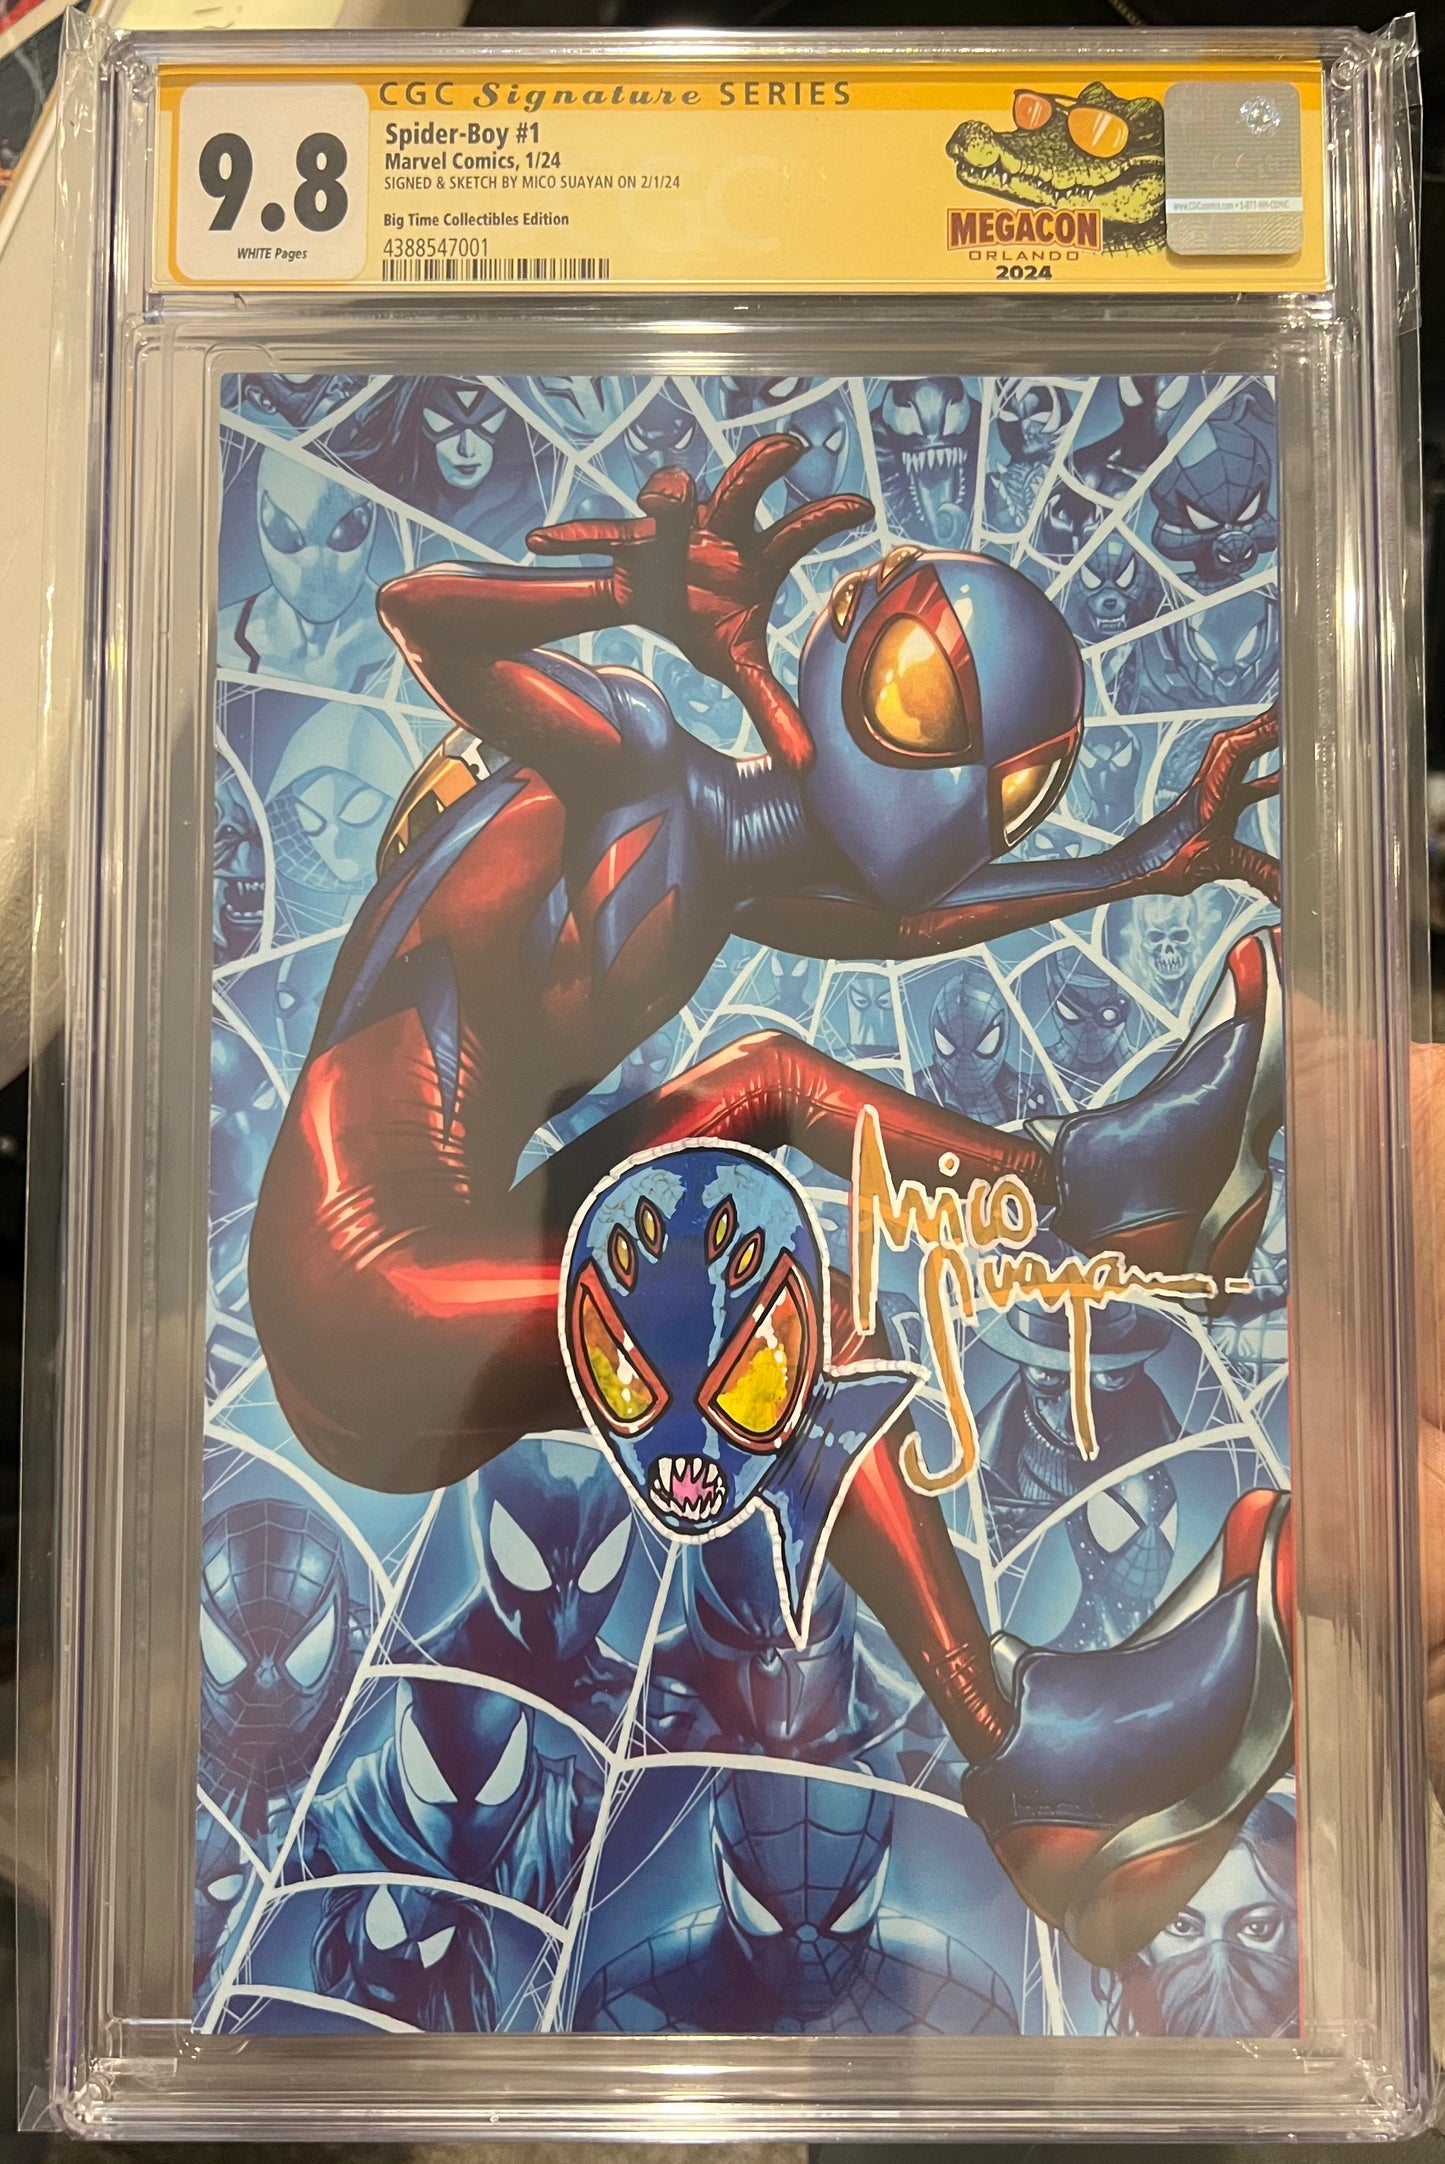 SPIDER-BOY #1 CGC SS 9.8 MICO SUAYAN Signed/Sketched Secret Variant W/ Custom Label from Megacon Orlando